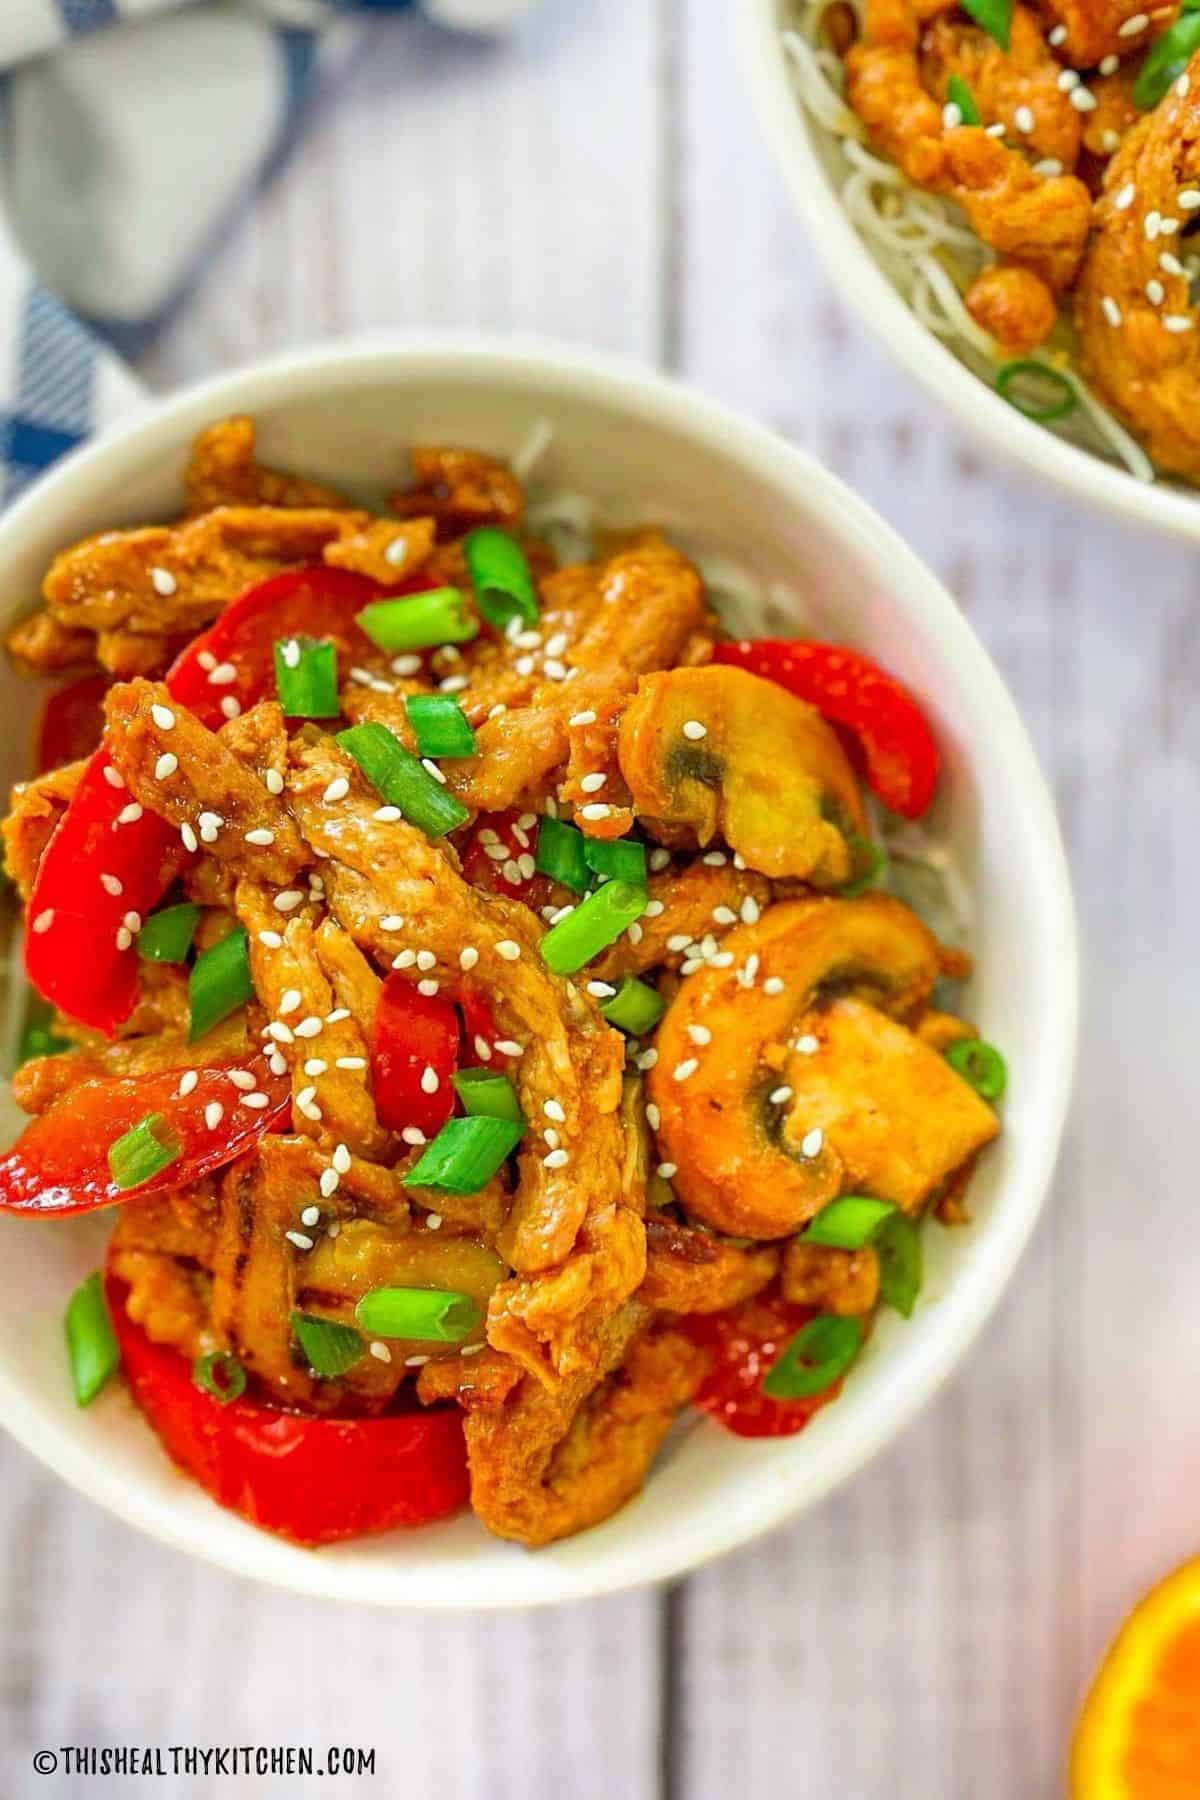 Soy curls with peppers and mushrooms in a white bowl.